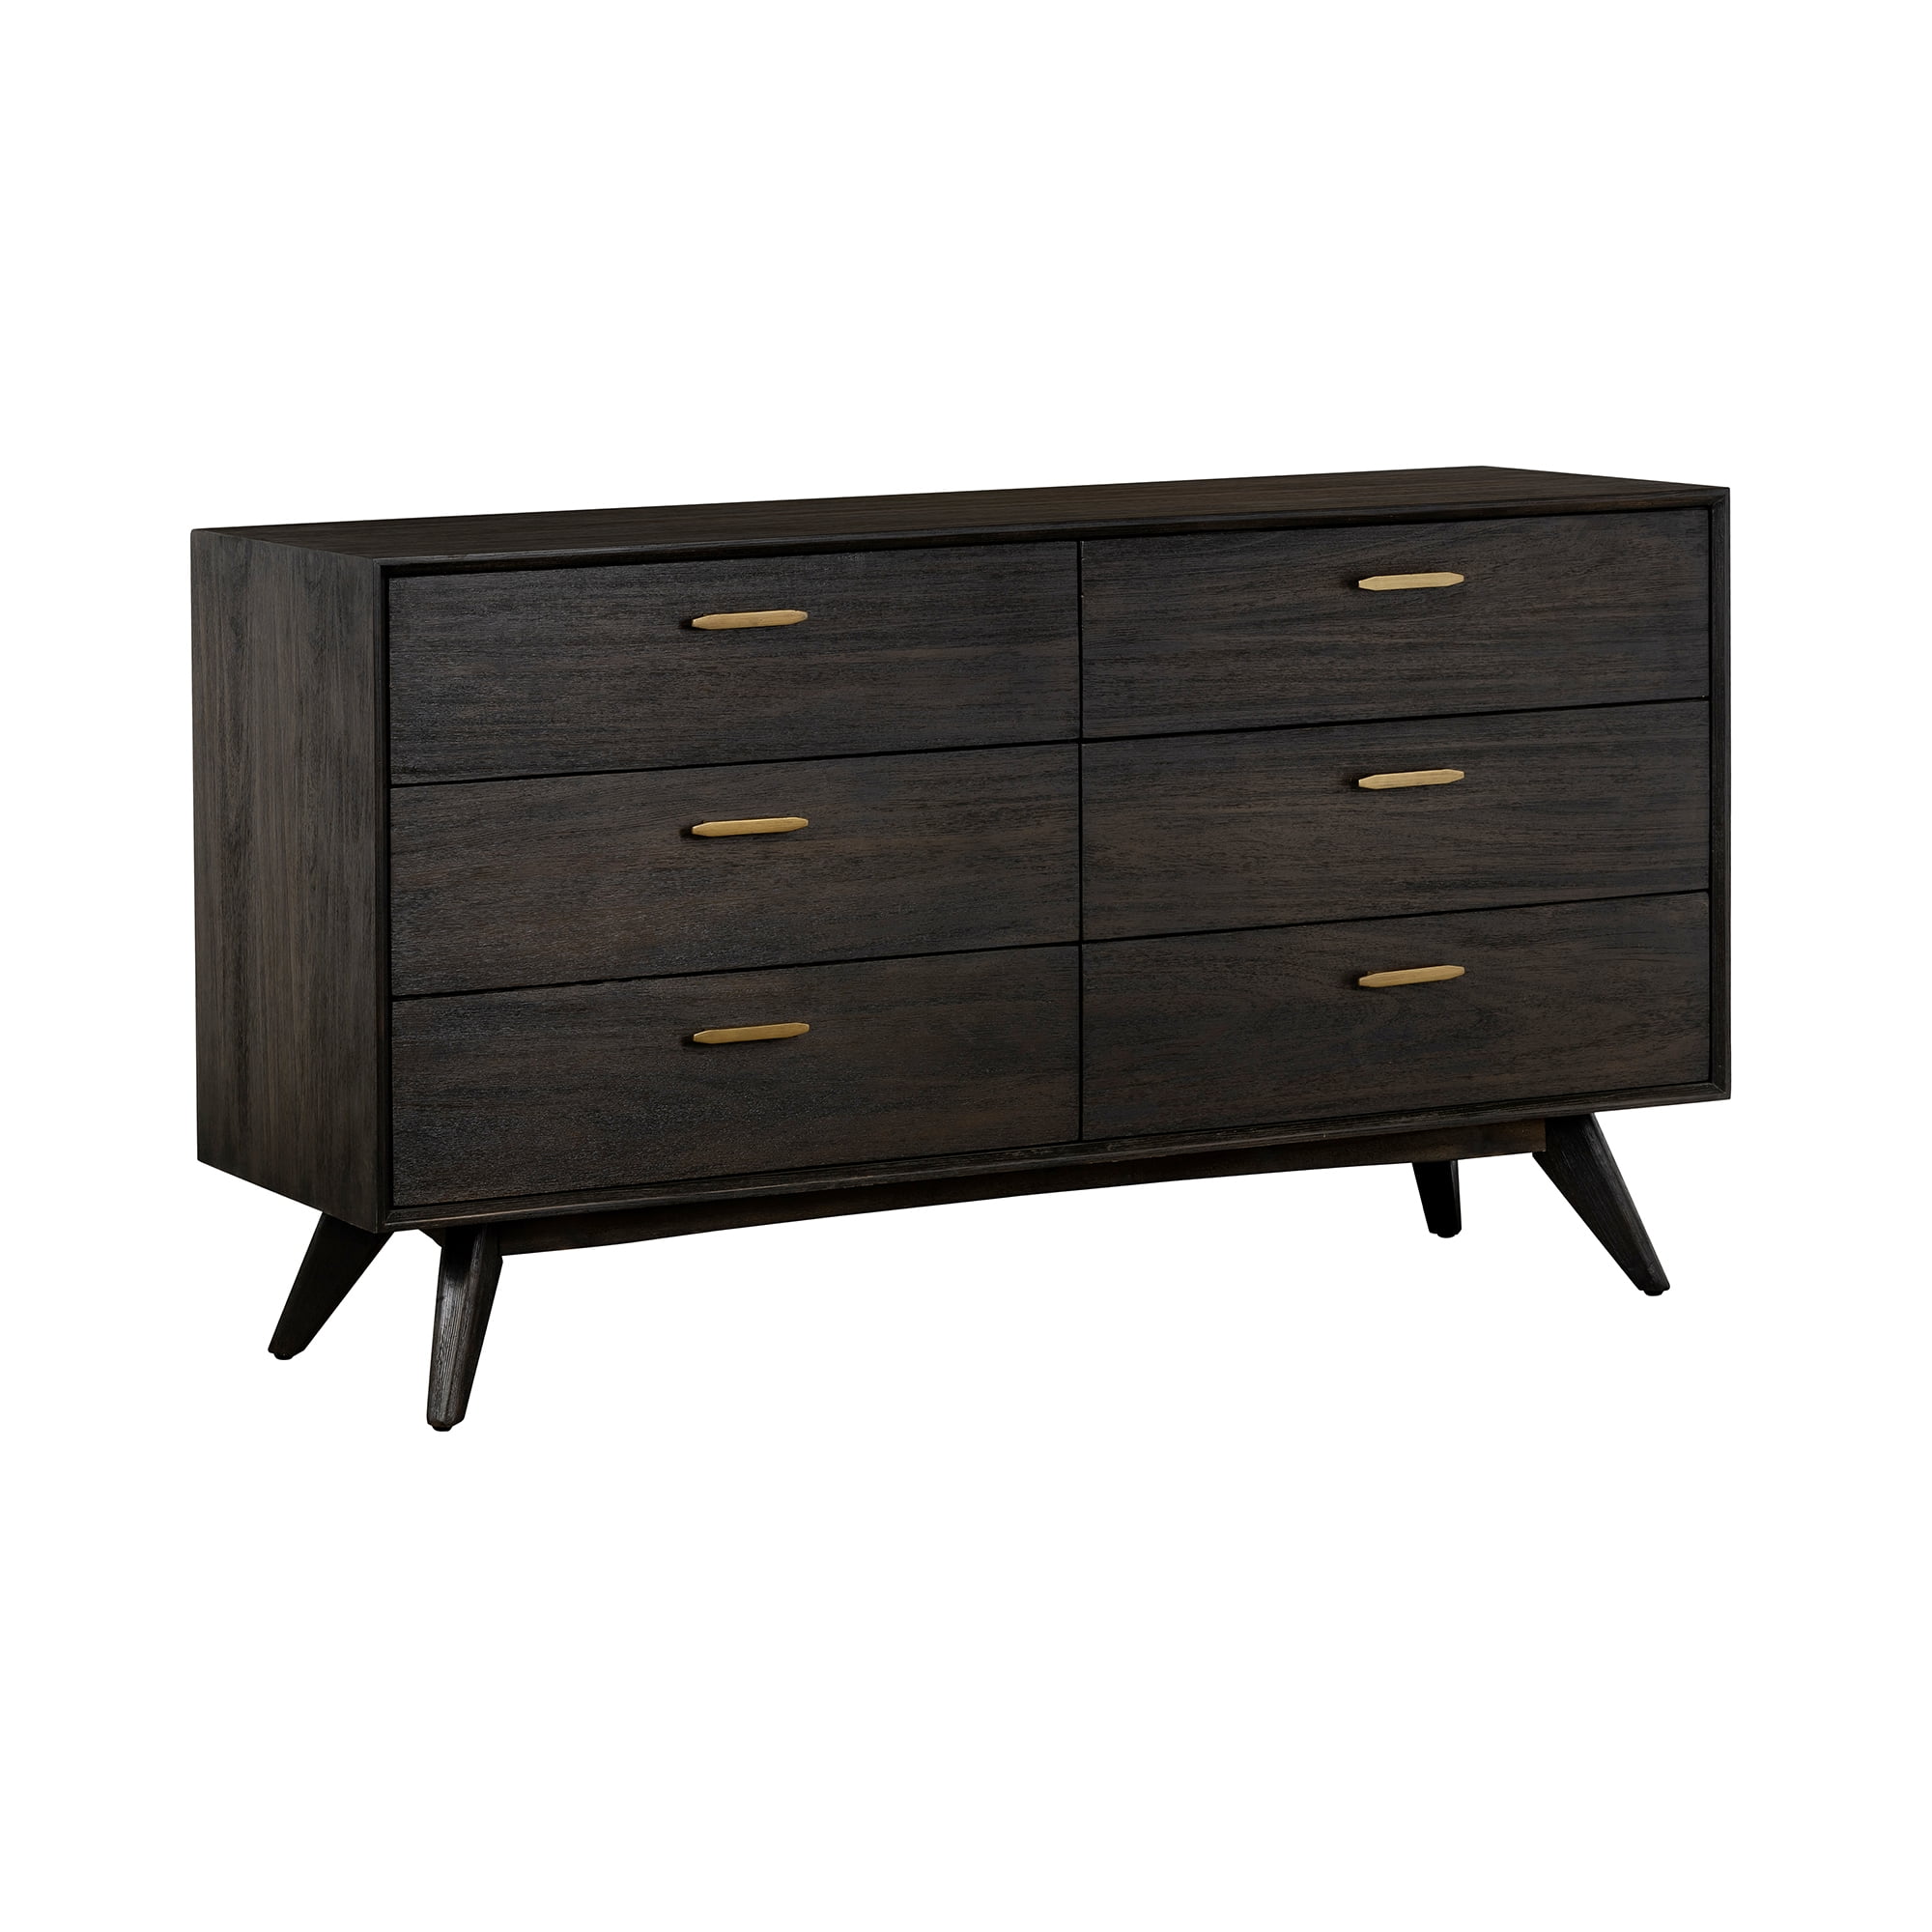 Picture of Armen Living LCLFDRBR Baly Acacia Mid-Century 6 Drawer Dresser - 34 x 63 x 18 in.